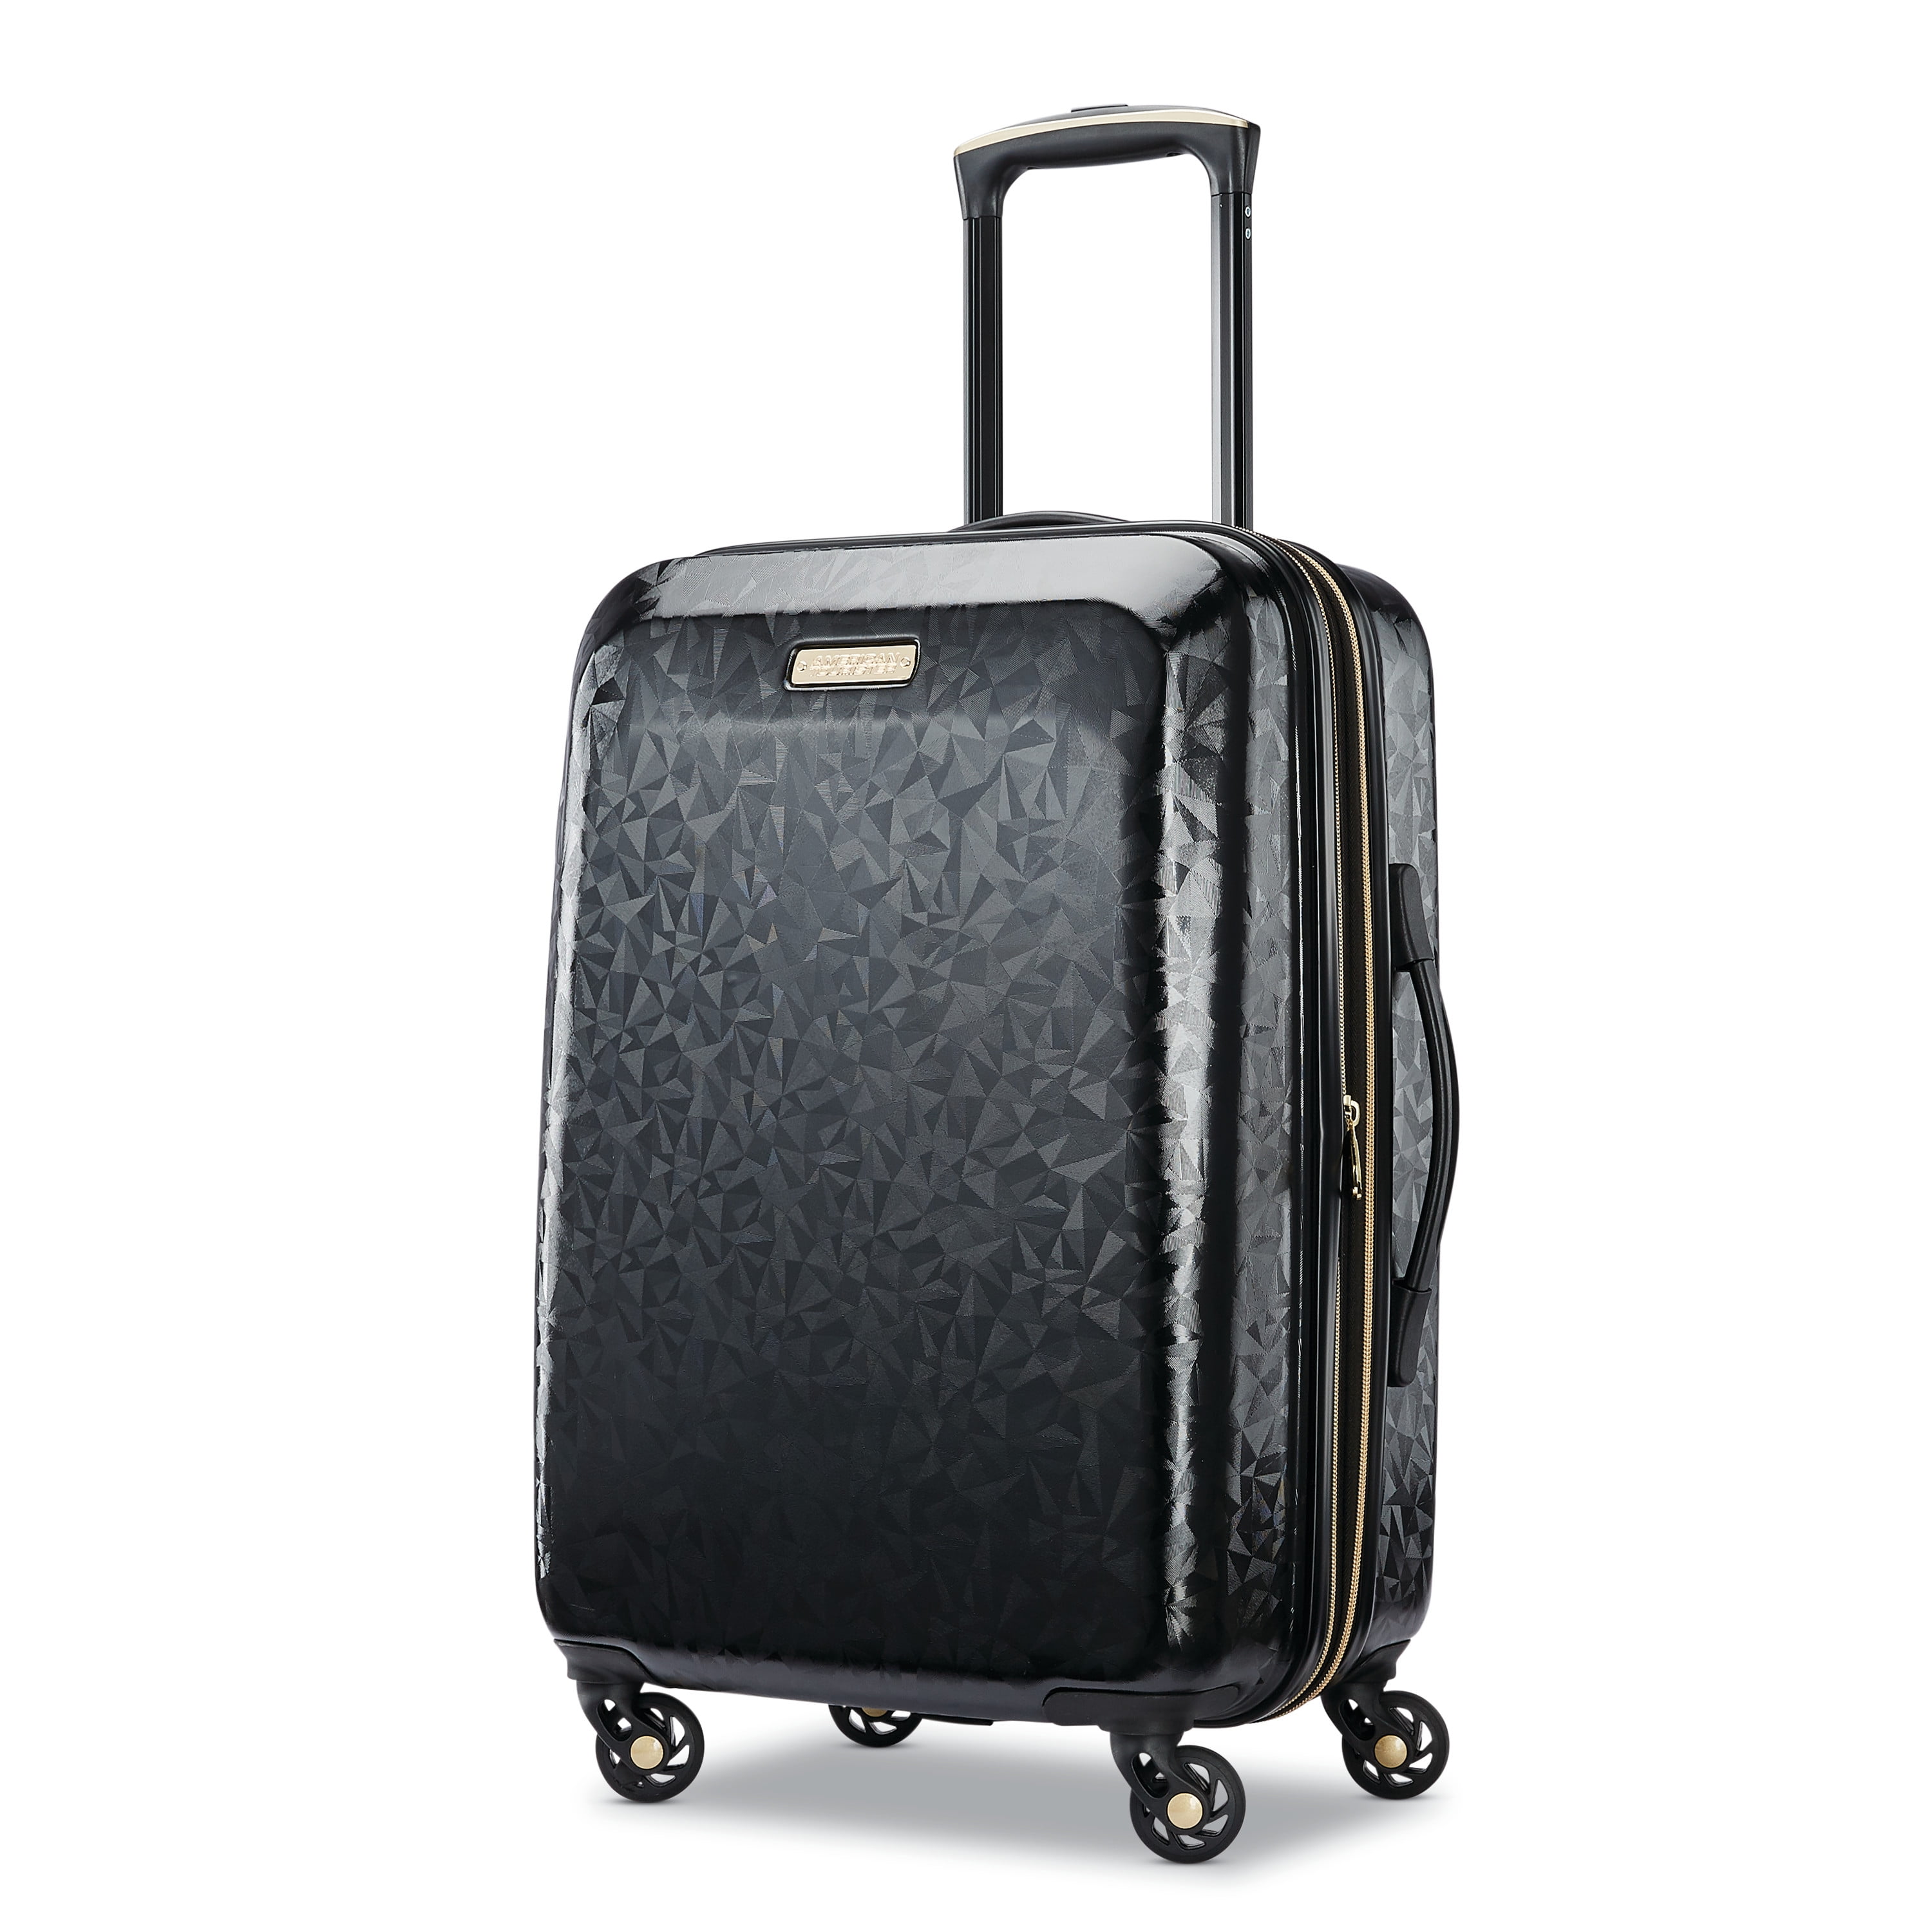 American Tourister Belle Voyage Hardside Carry On Spinner Suitcase ...